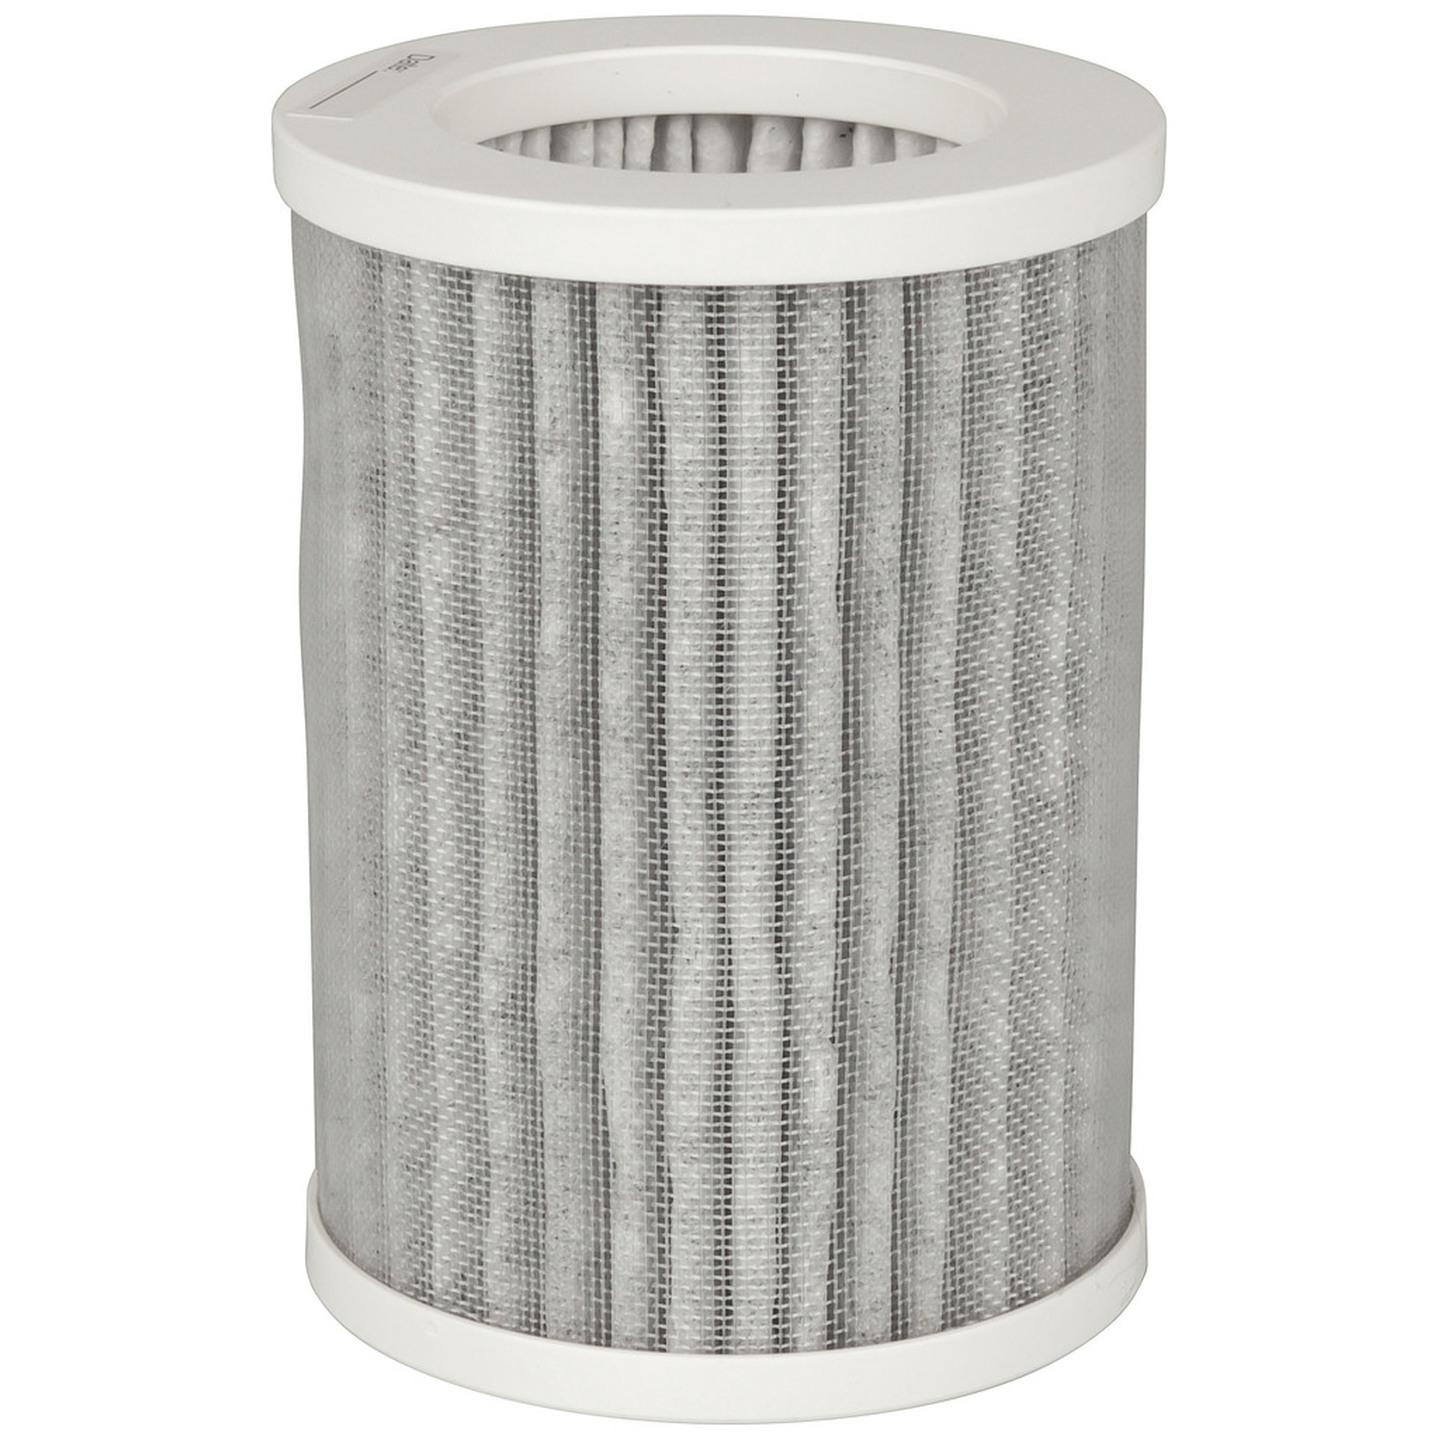 Spare 3-In-1 Filter to suit GH-1950 Air Purifier